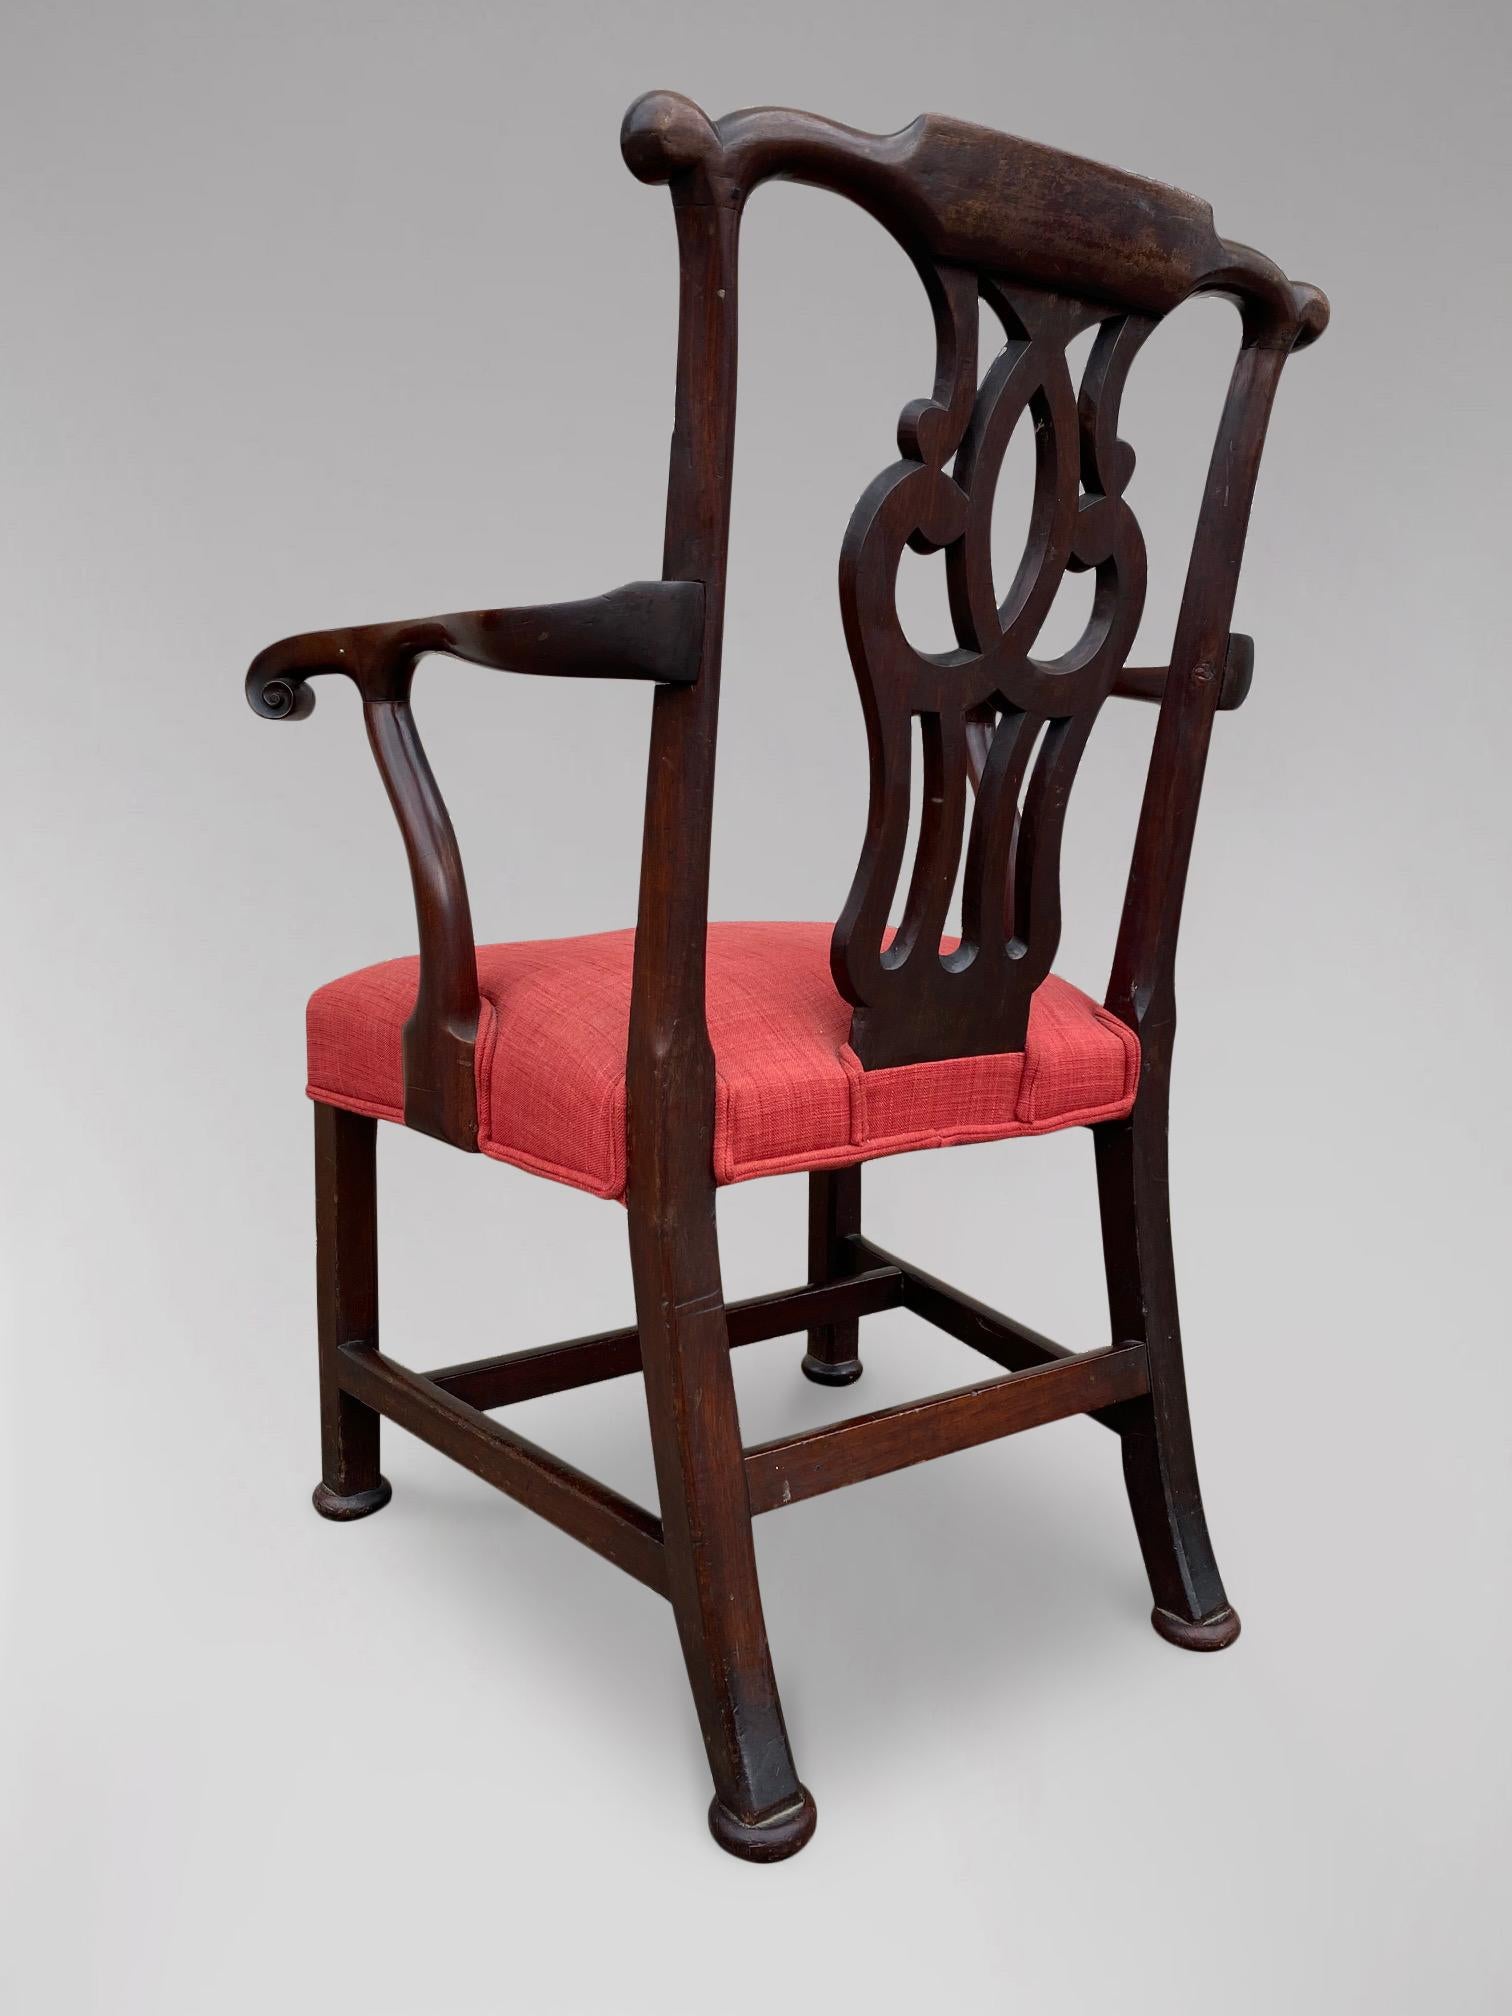 Hand-Carved Stunning 18th Century George III Period Mahogany Chippendale Armchair For Sale